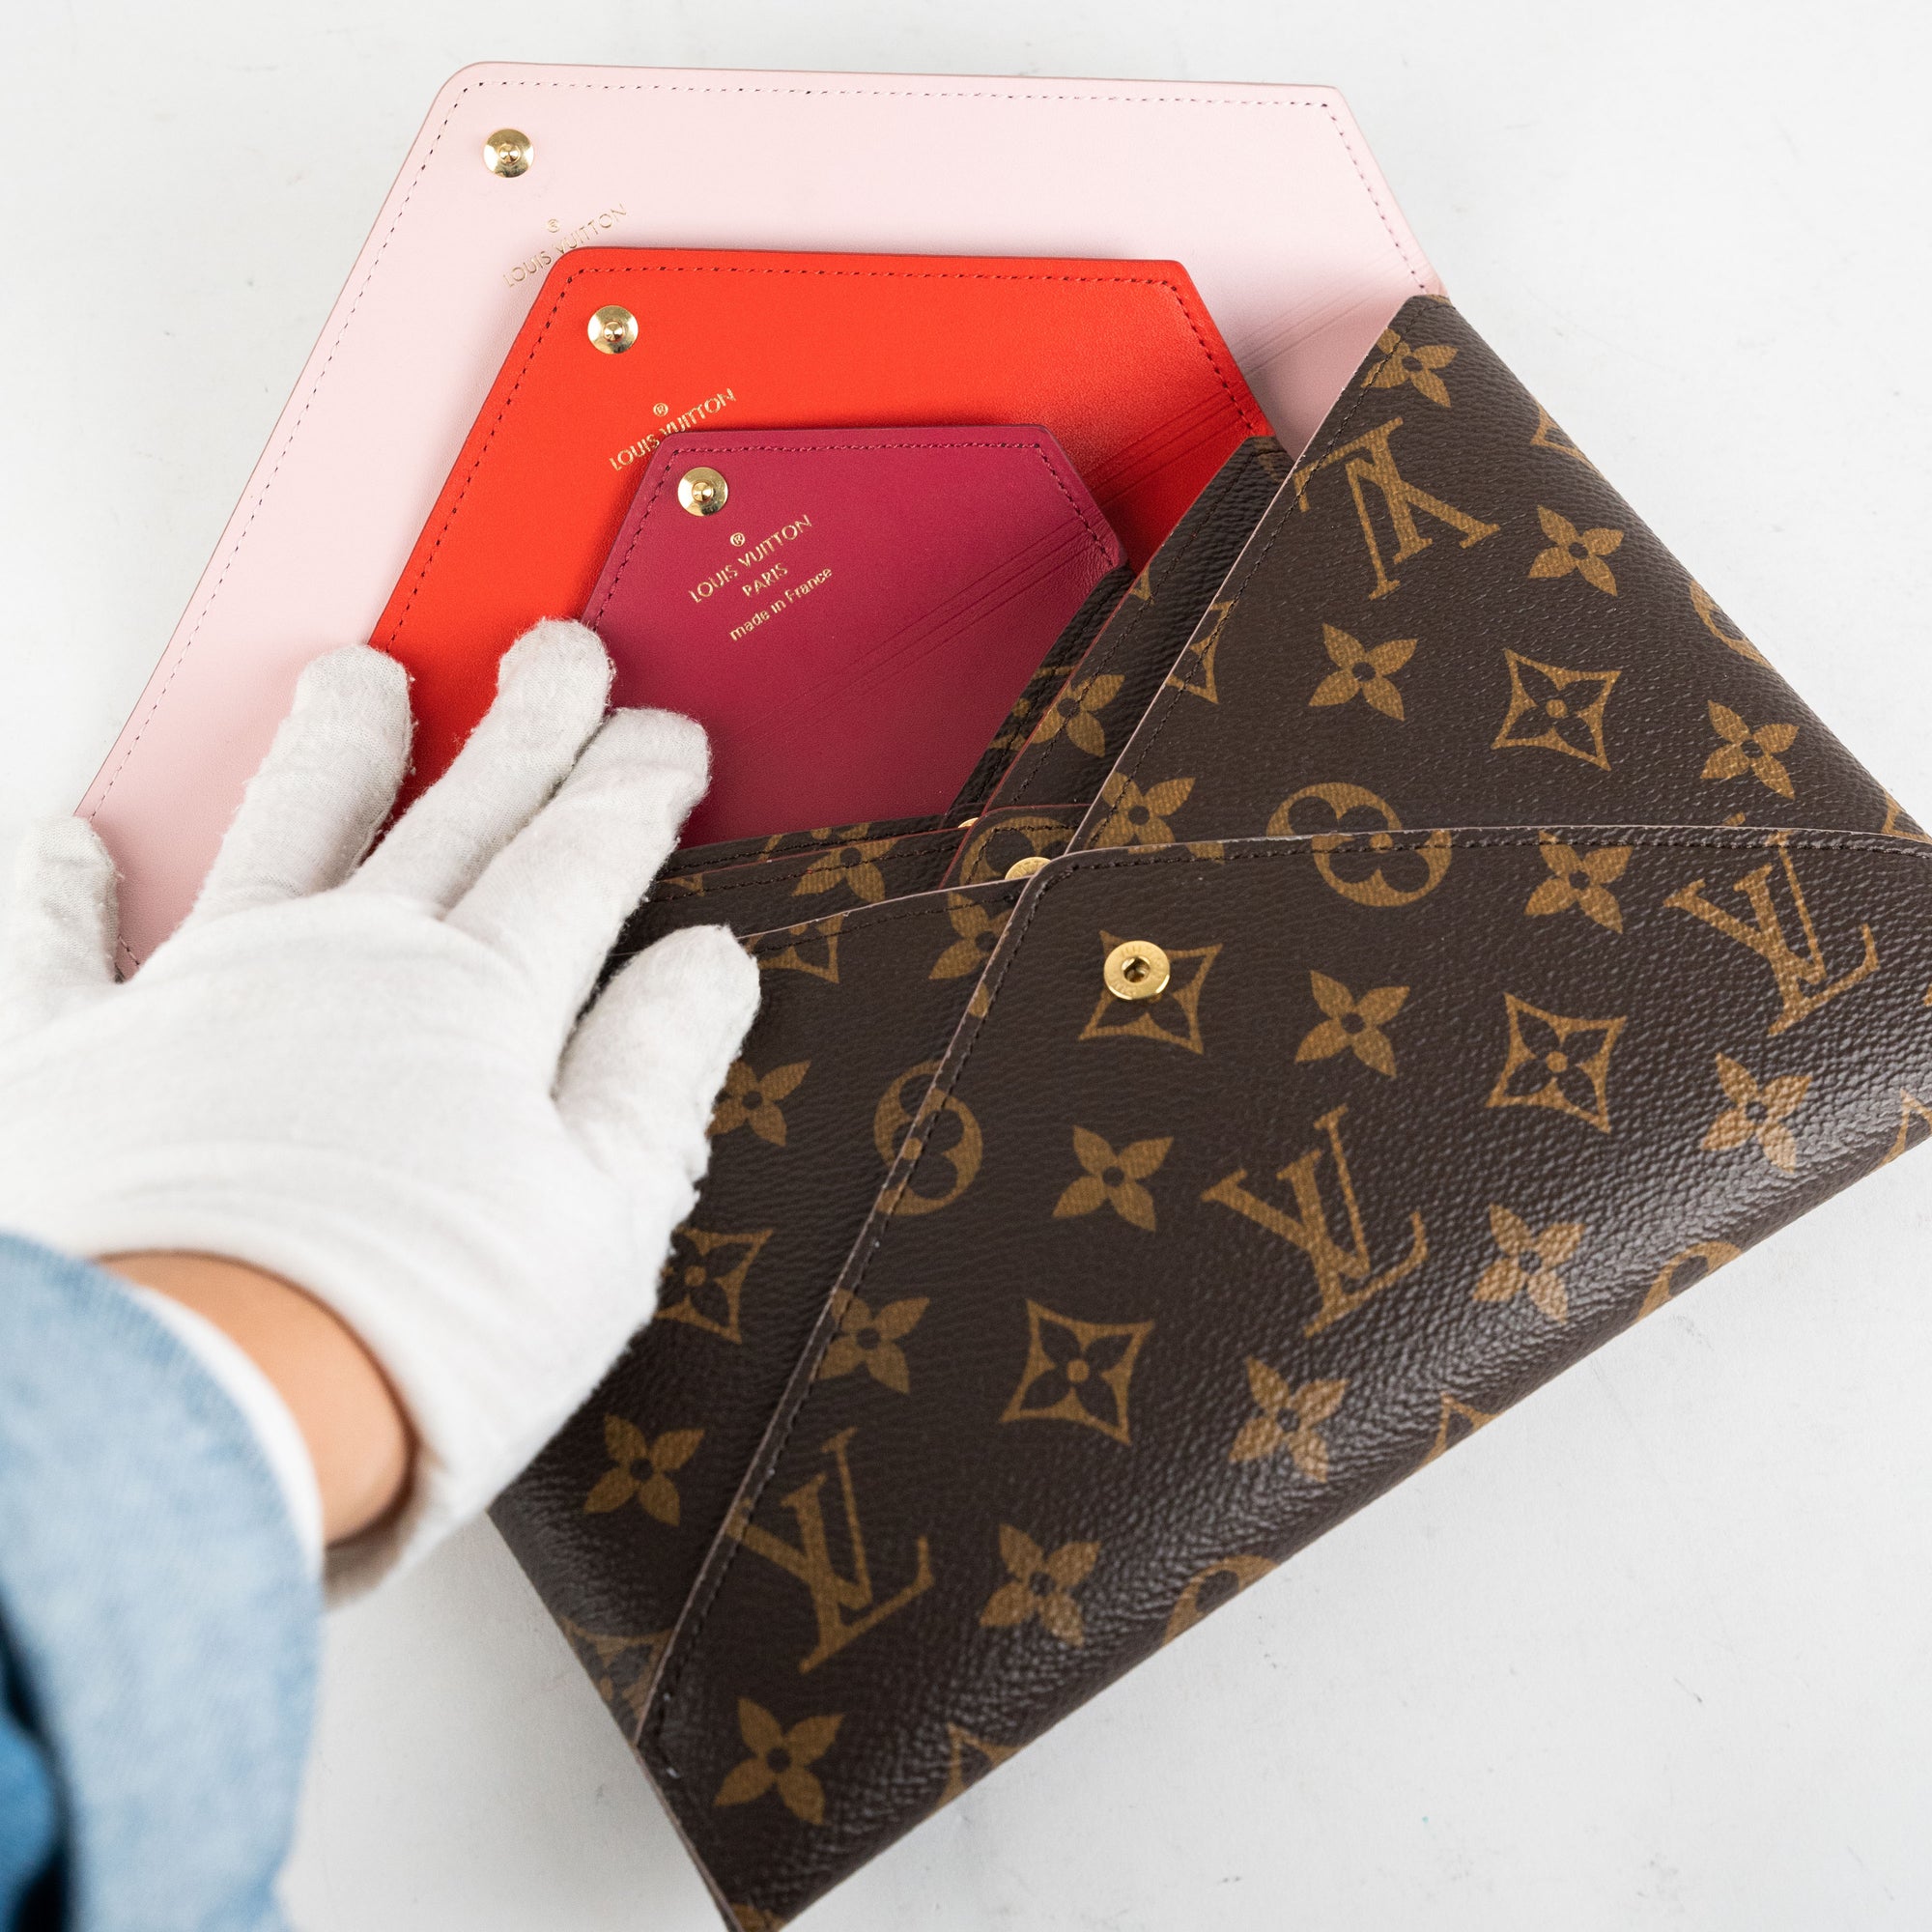 Sale till Friday! Authentic- BNIB Louis Vuitton Kirigami Pochette (Large)  By The Pool series